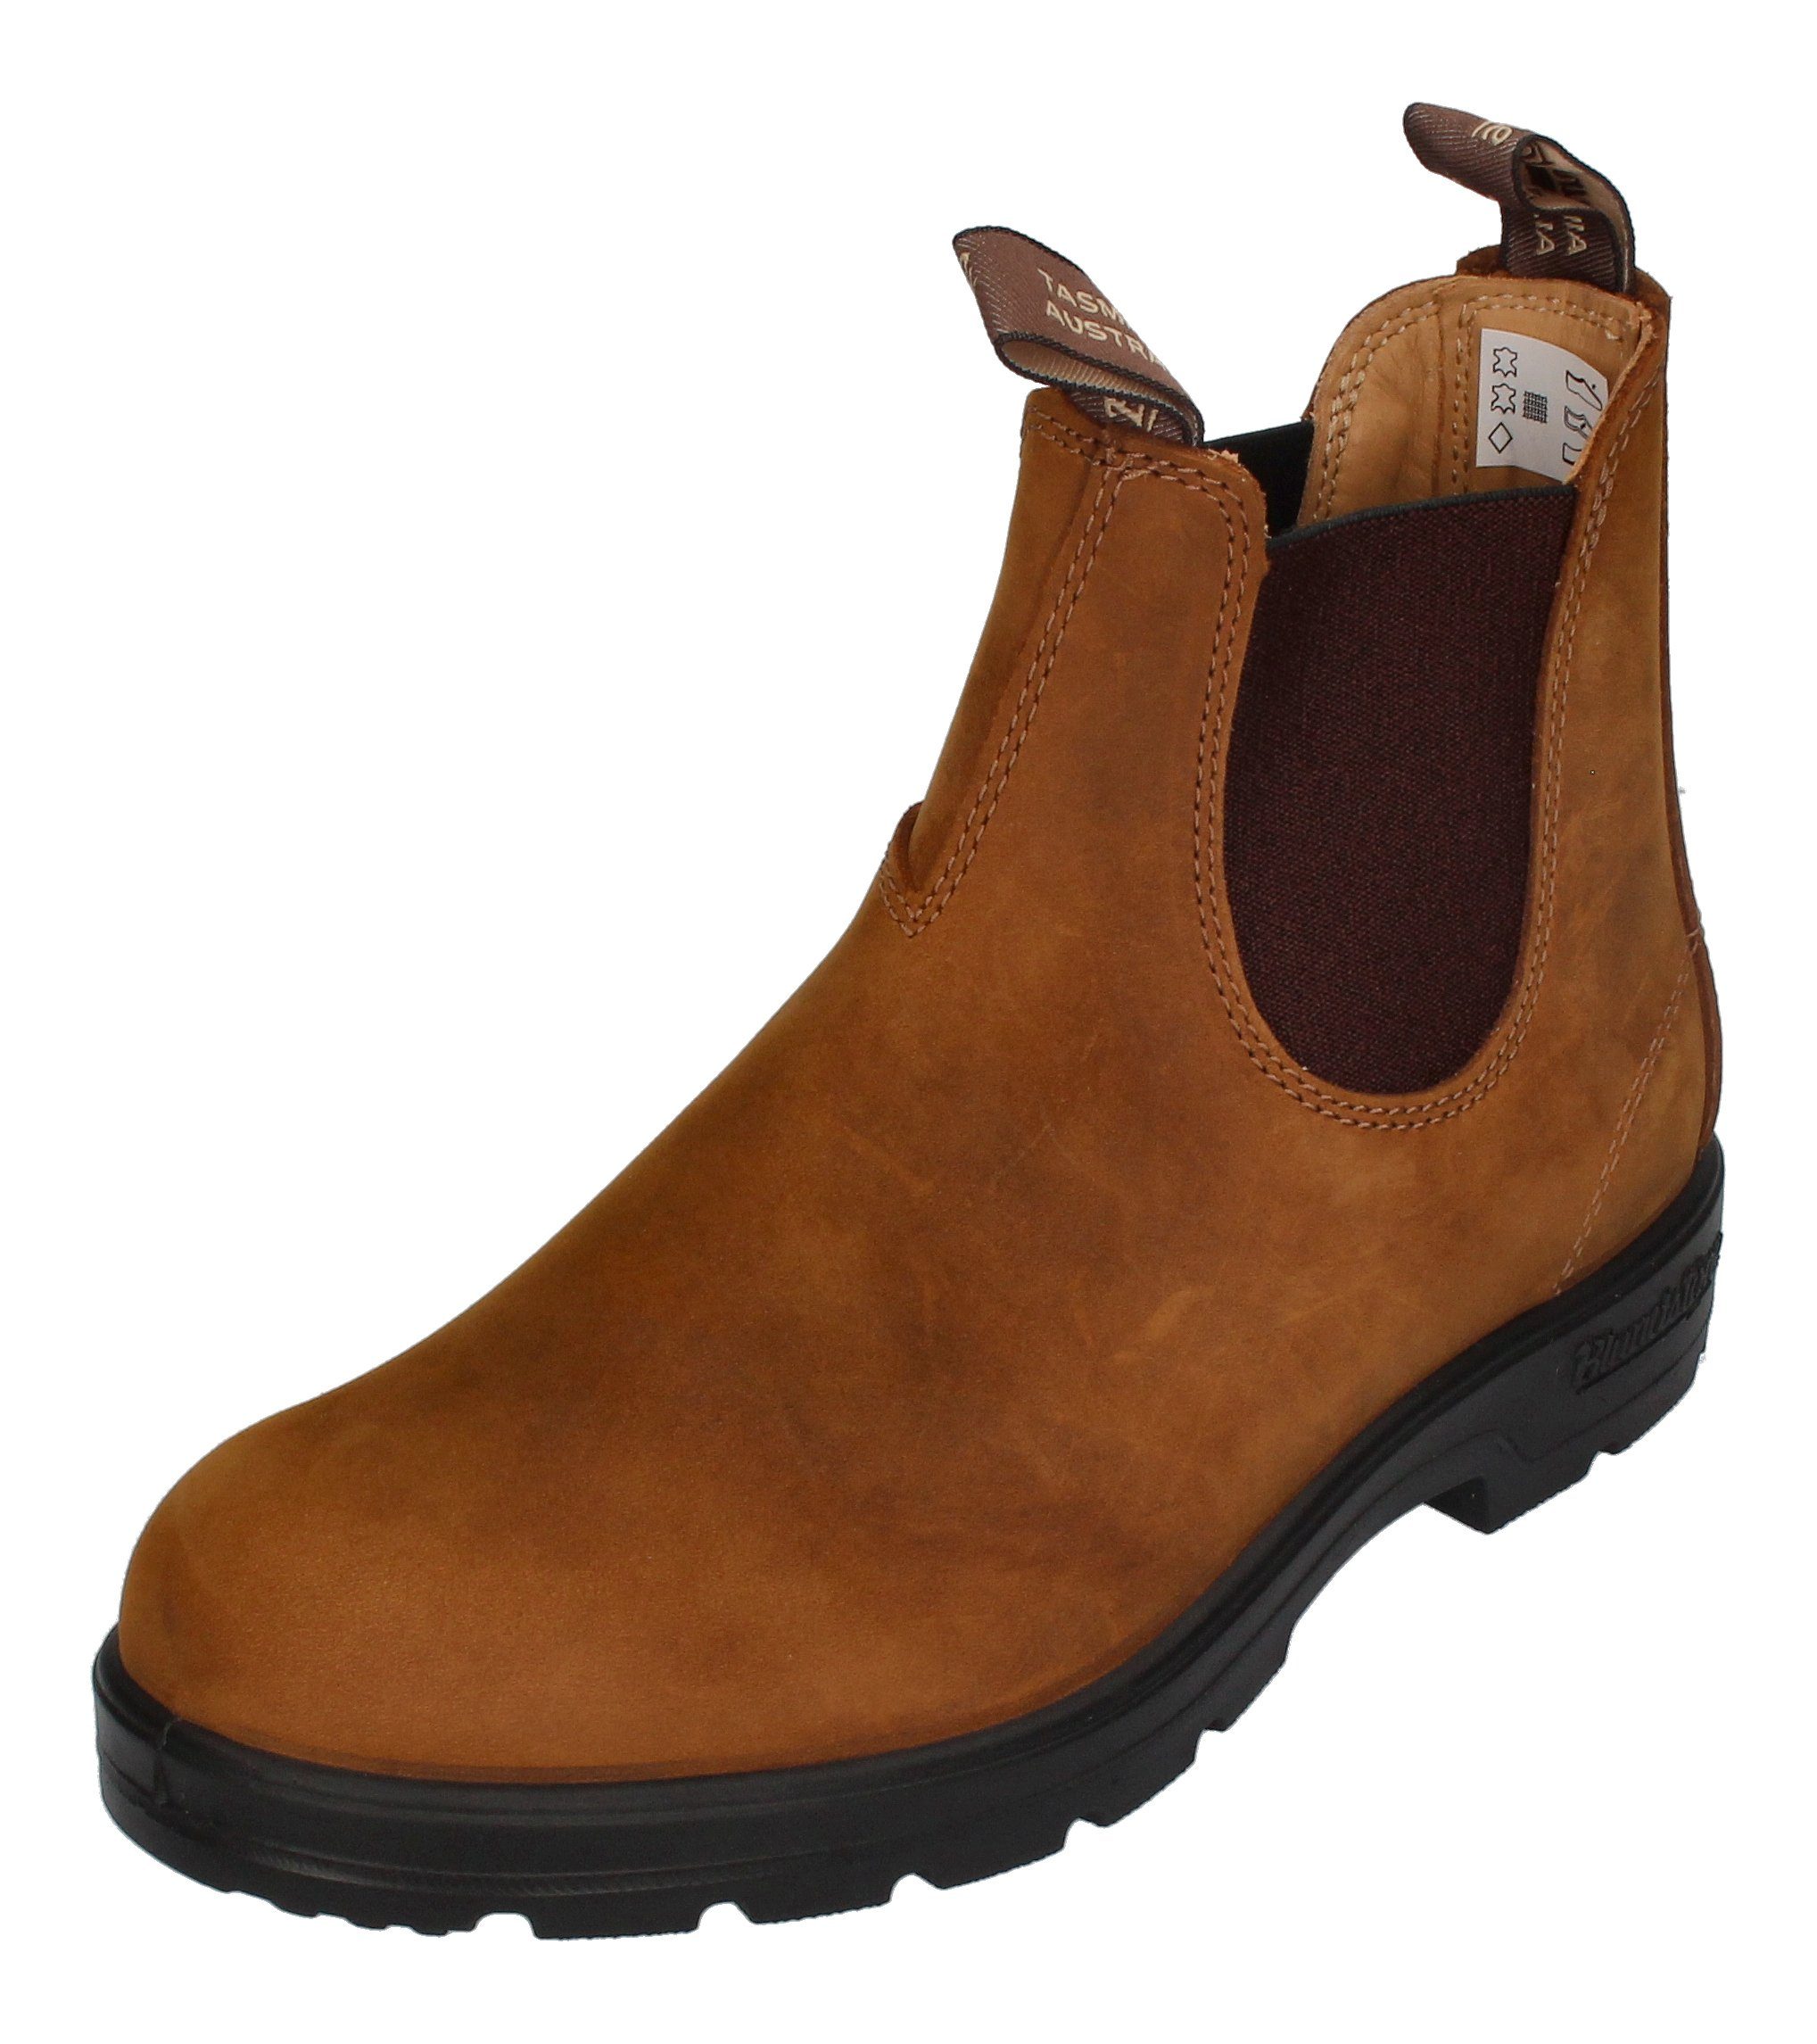 Blundstone 562 Chelseaboots Crazy Horse